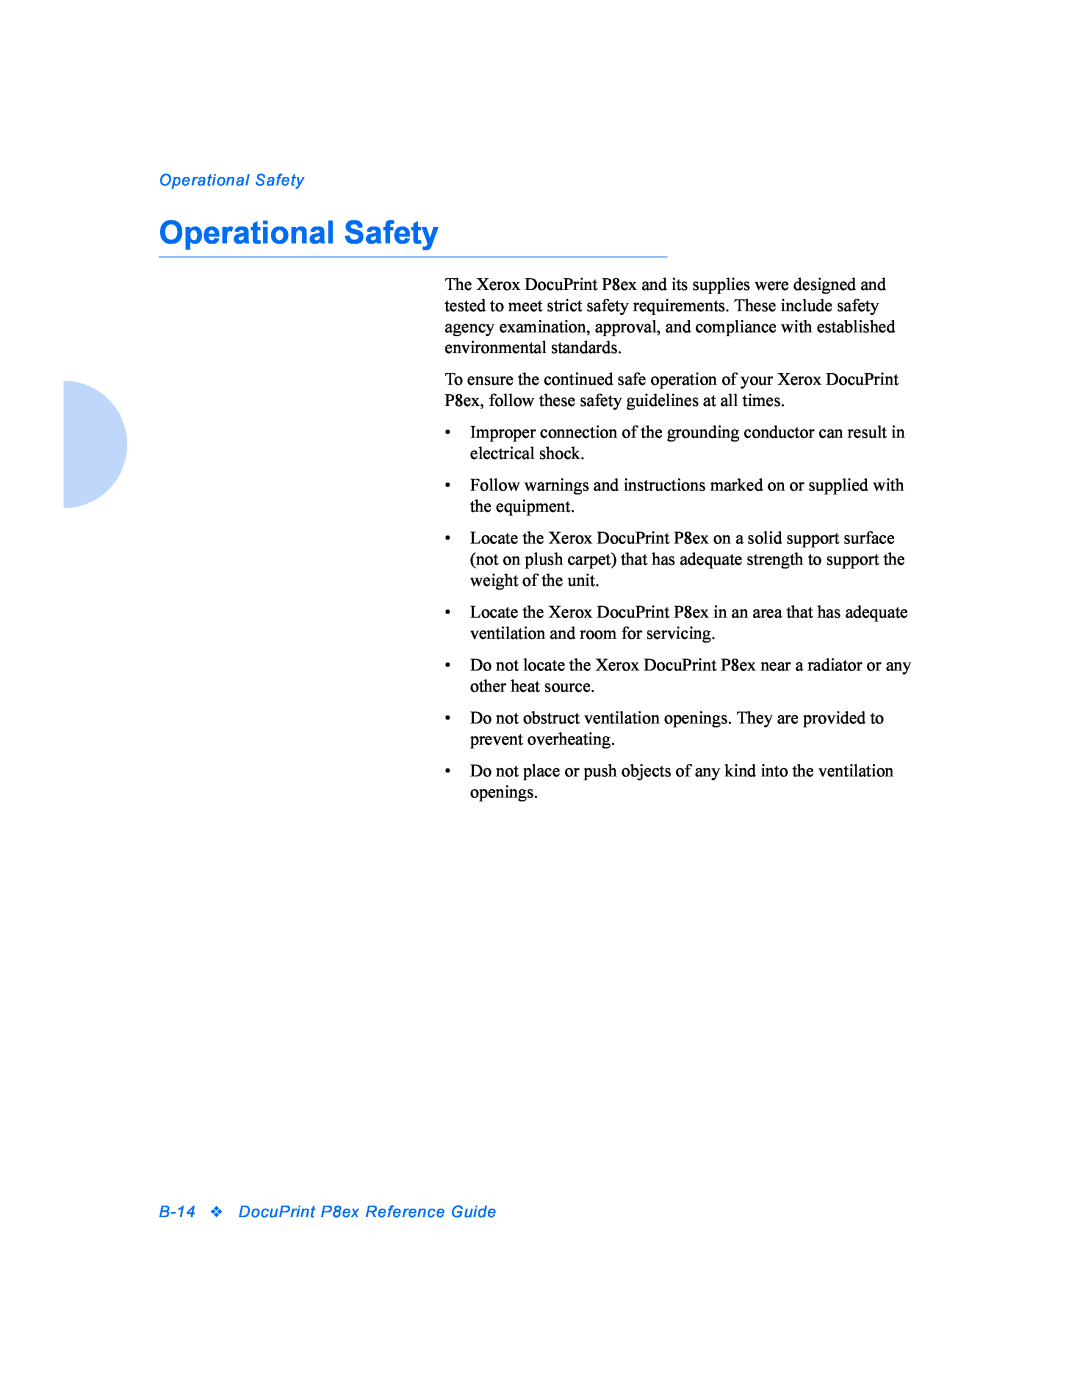 Xerox P8EX manual Operational Safety 